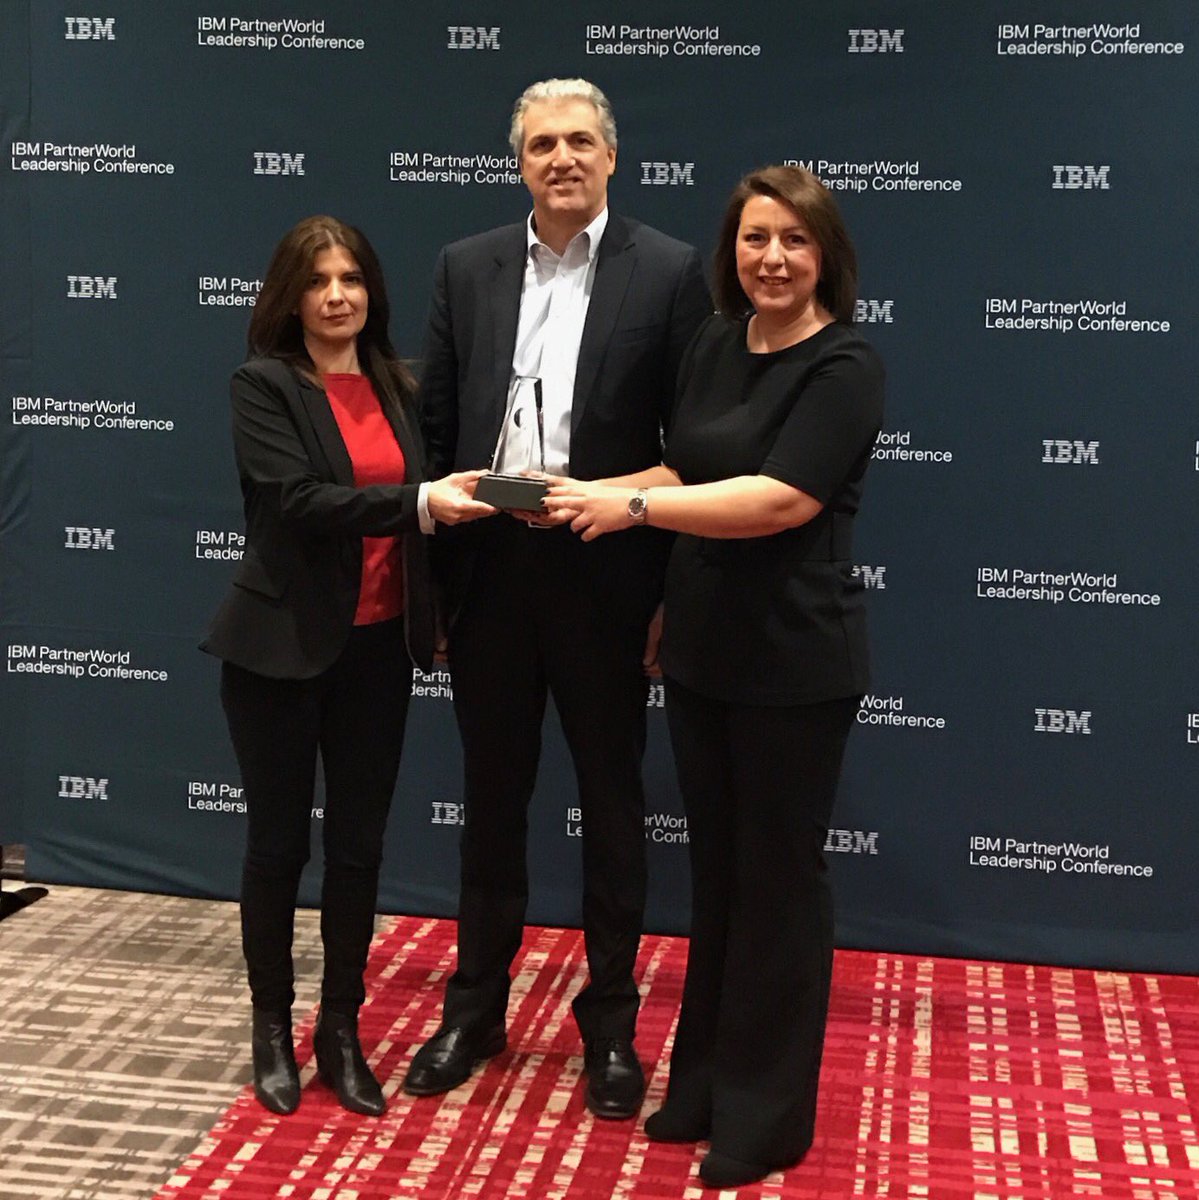 Performance is proud to be a Beacon Award Finalist for the Most Innovative Client Experience on z Systems! #ibmpwlc #perftech